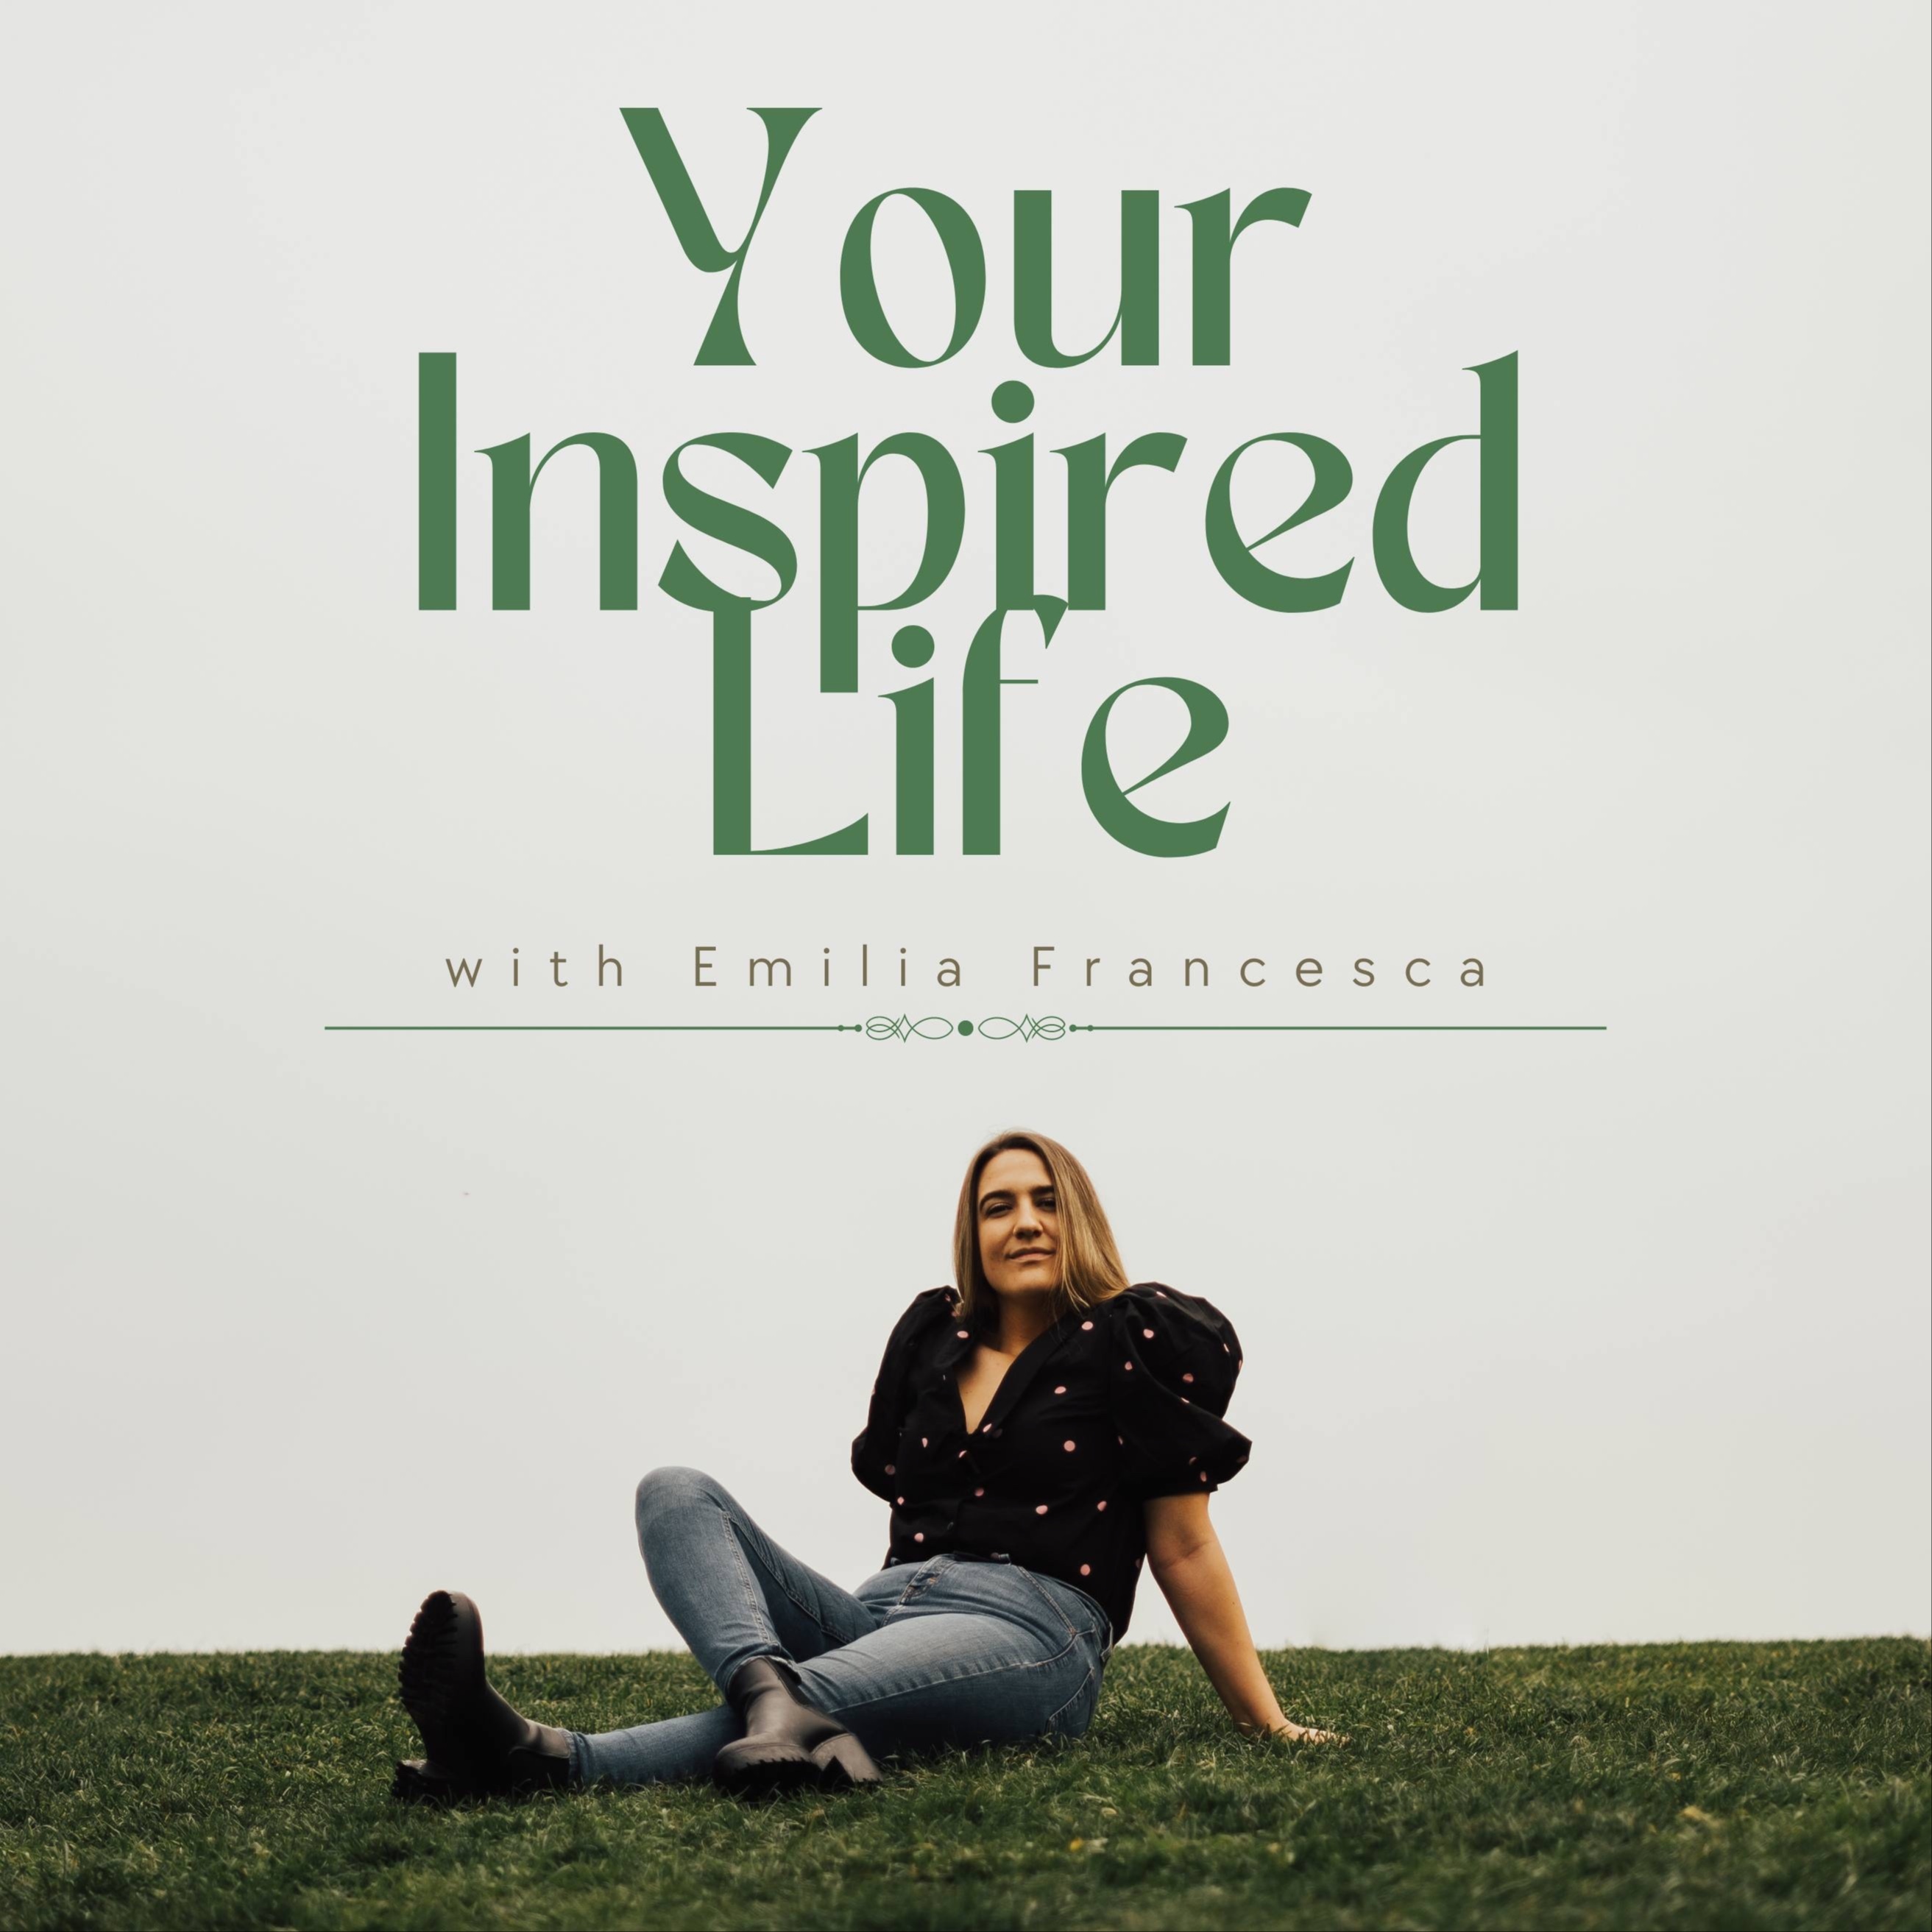 Your inspired life